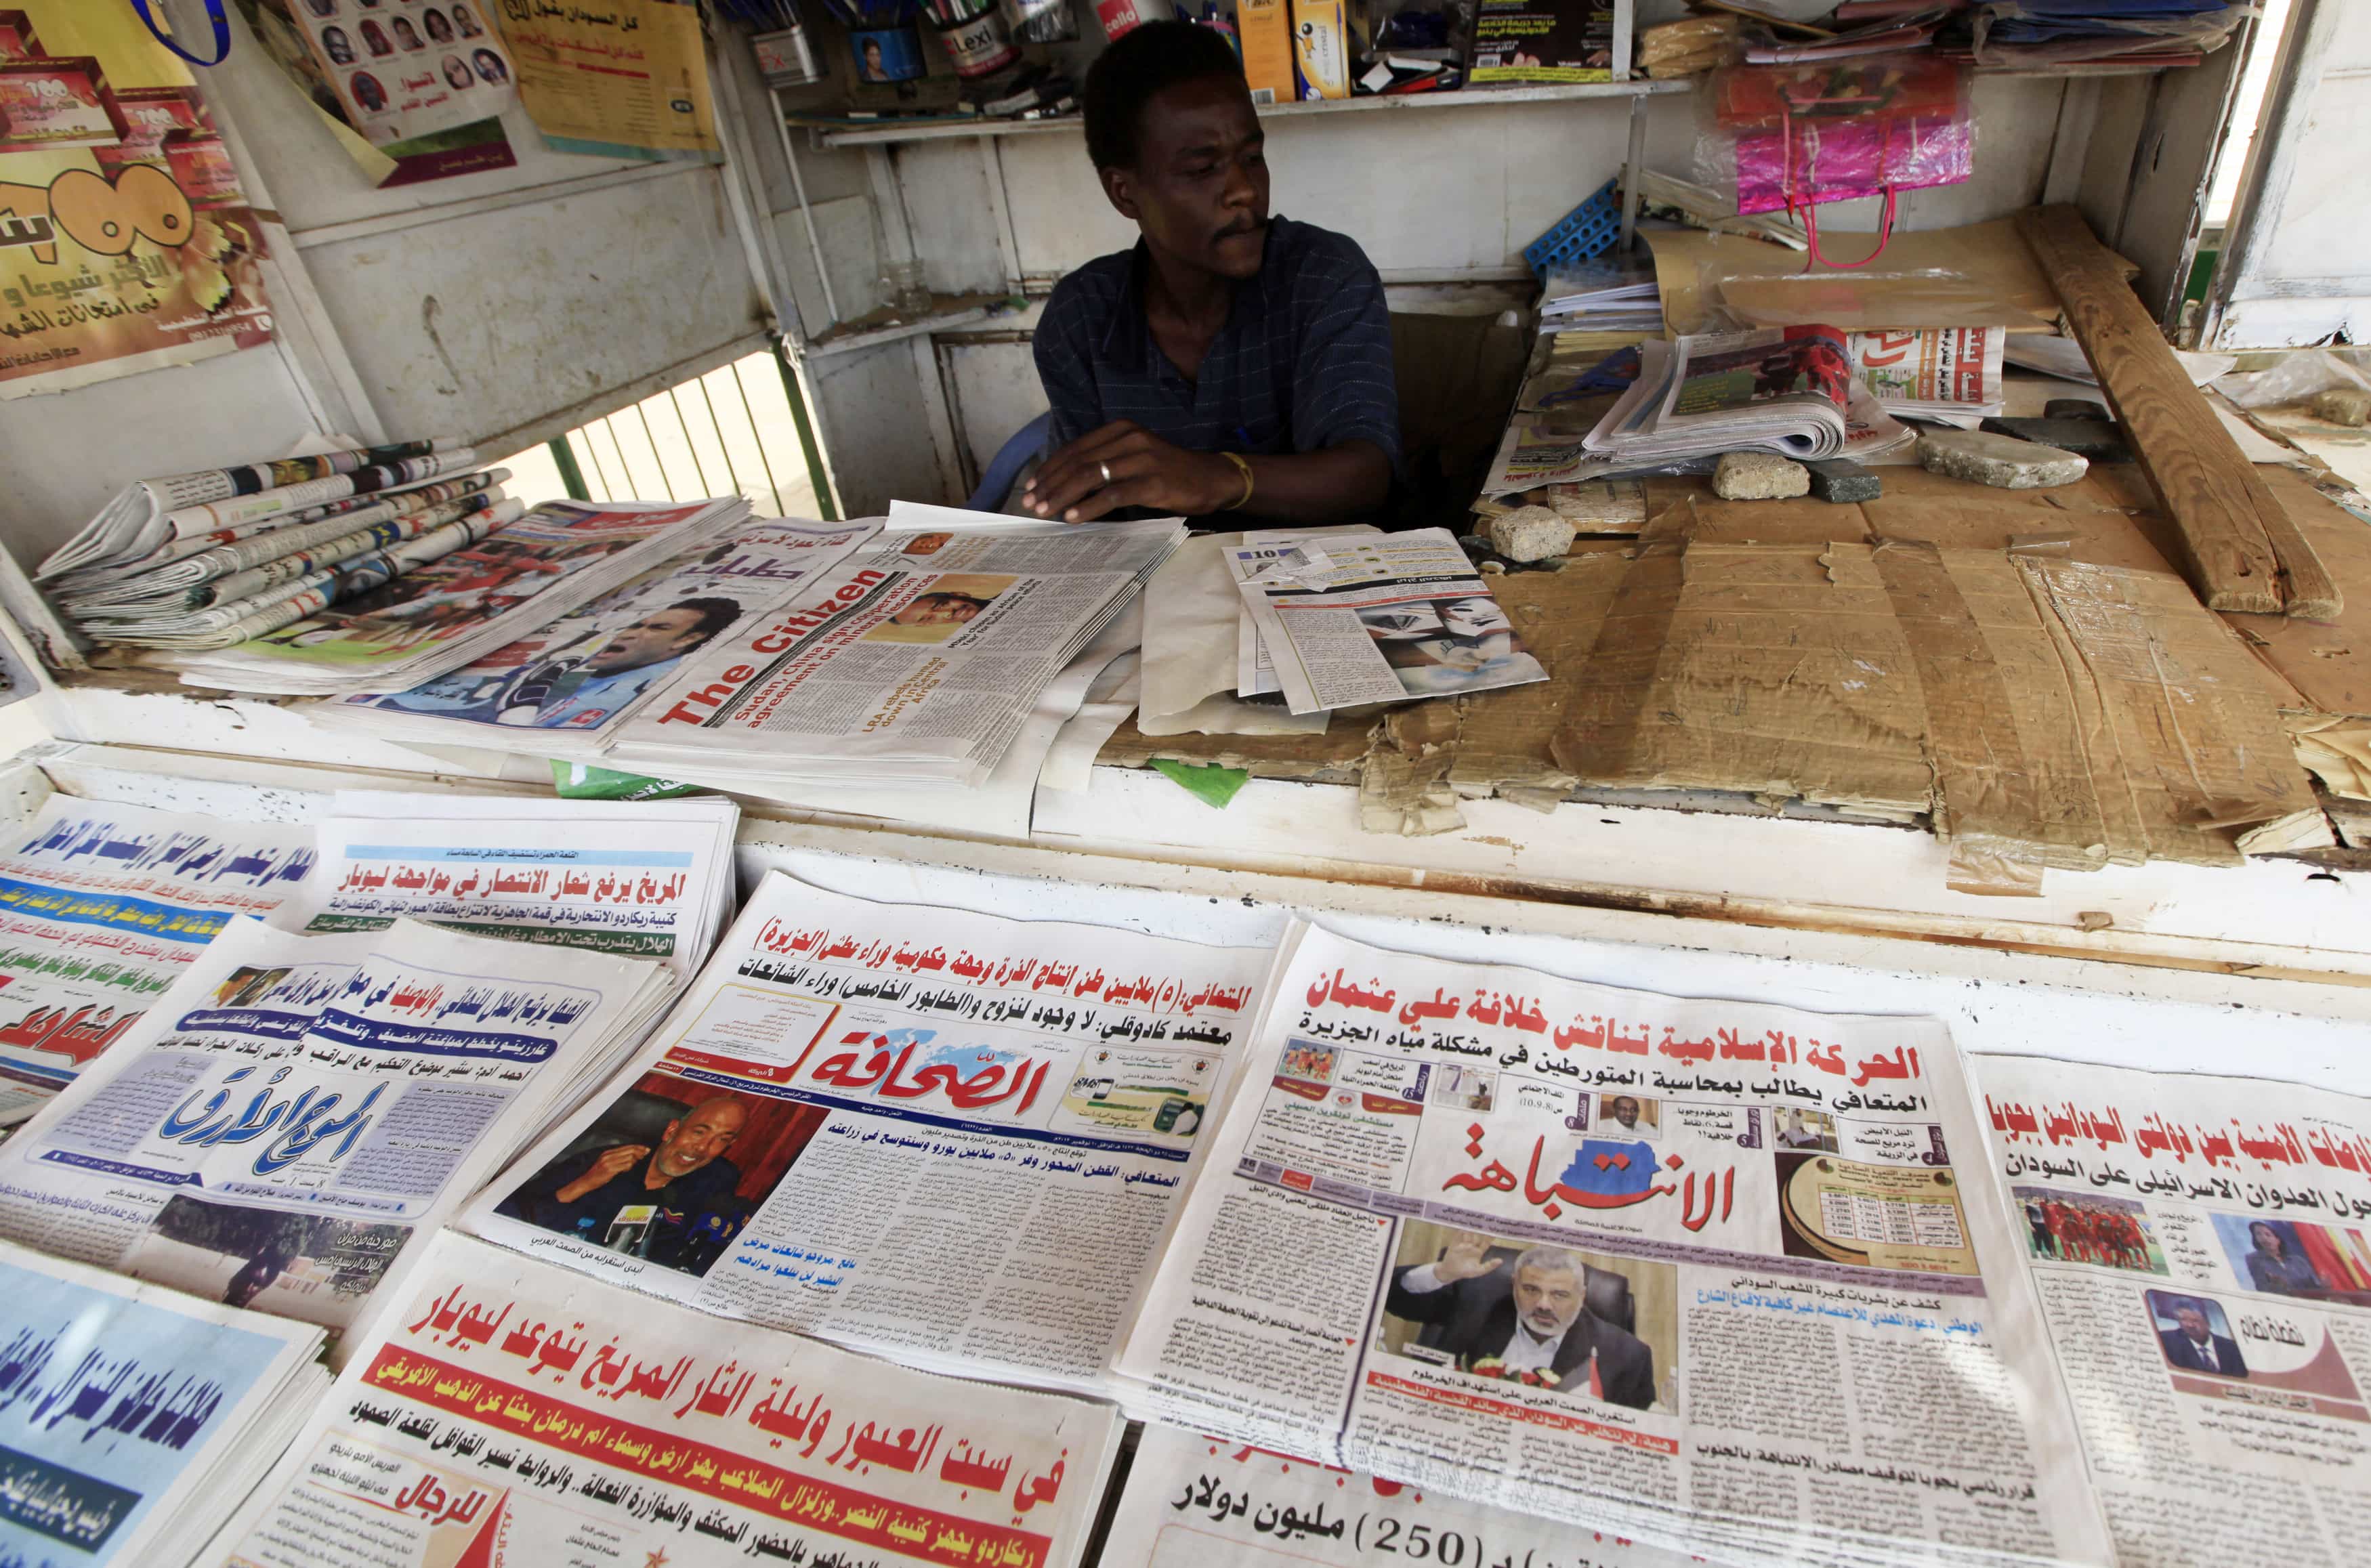 The al-Intibaha newspaper is seen on display with other newspaper titles at a newsstand in Khartoum, 10 November 2012., REUTERS/Mohamed Nureldin Abdallah